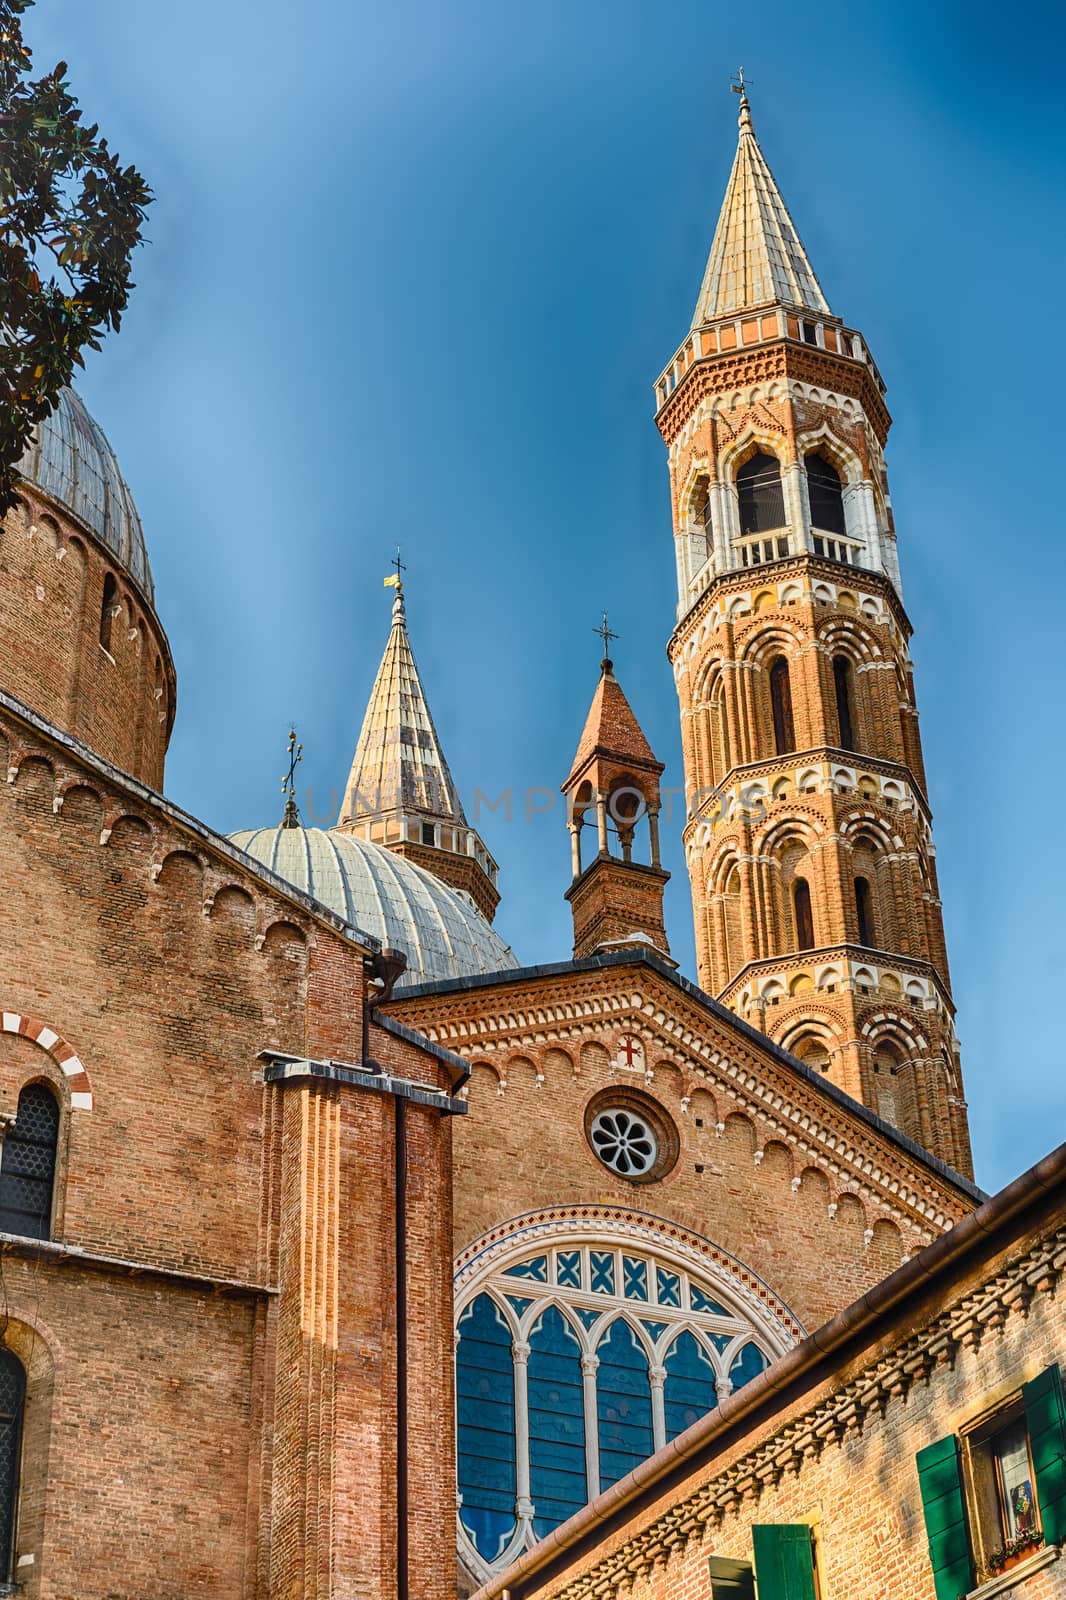 Detail of the Basilica of Saint Anthony in Padua, Italy by marcorubino